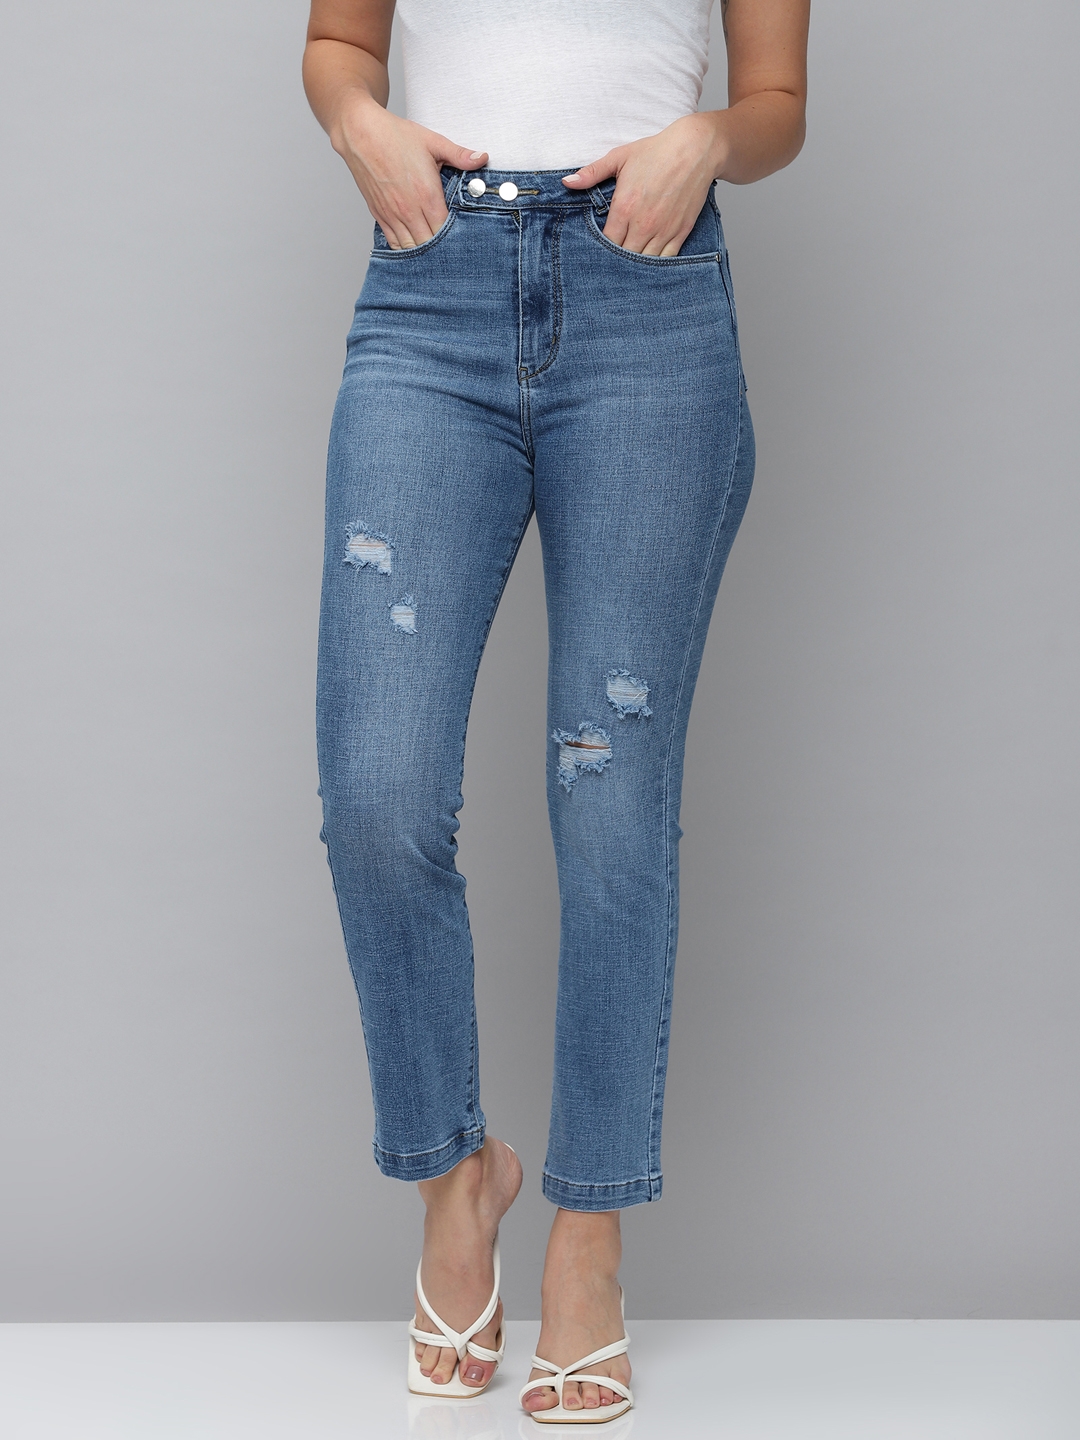 SHOWOFF Women's High-Rise Blue Mildly Distressed Jeans